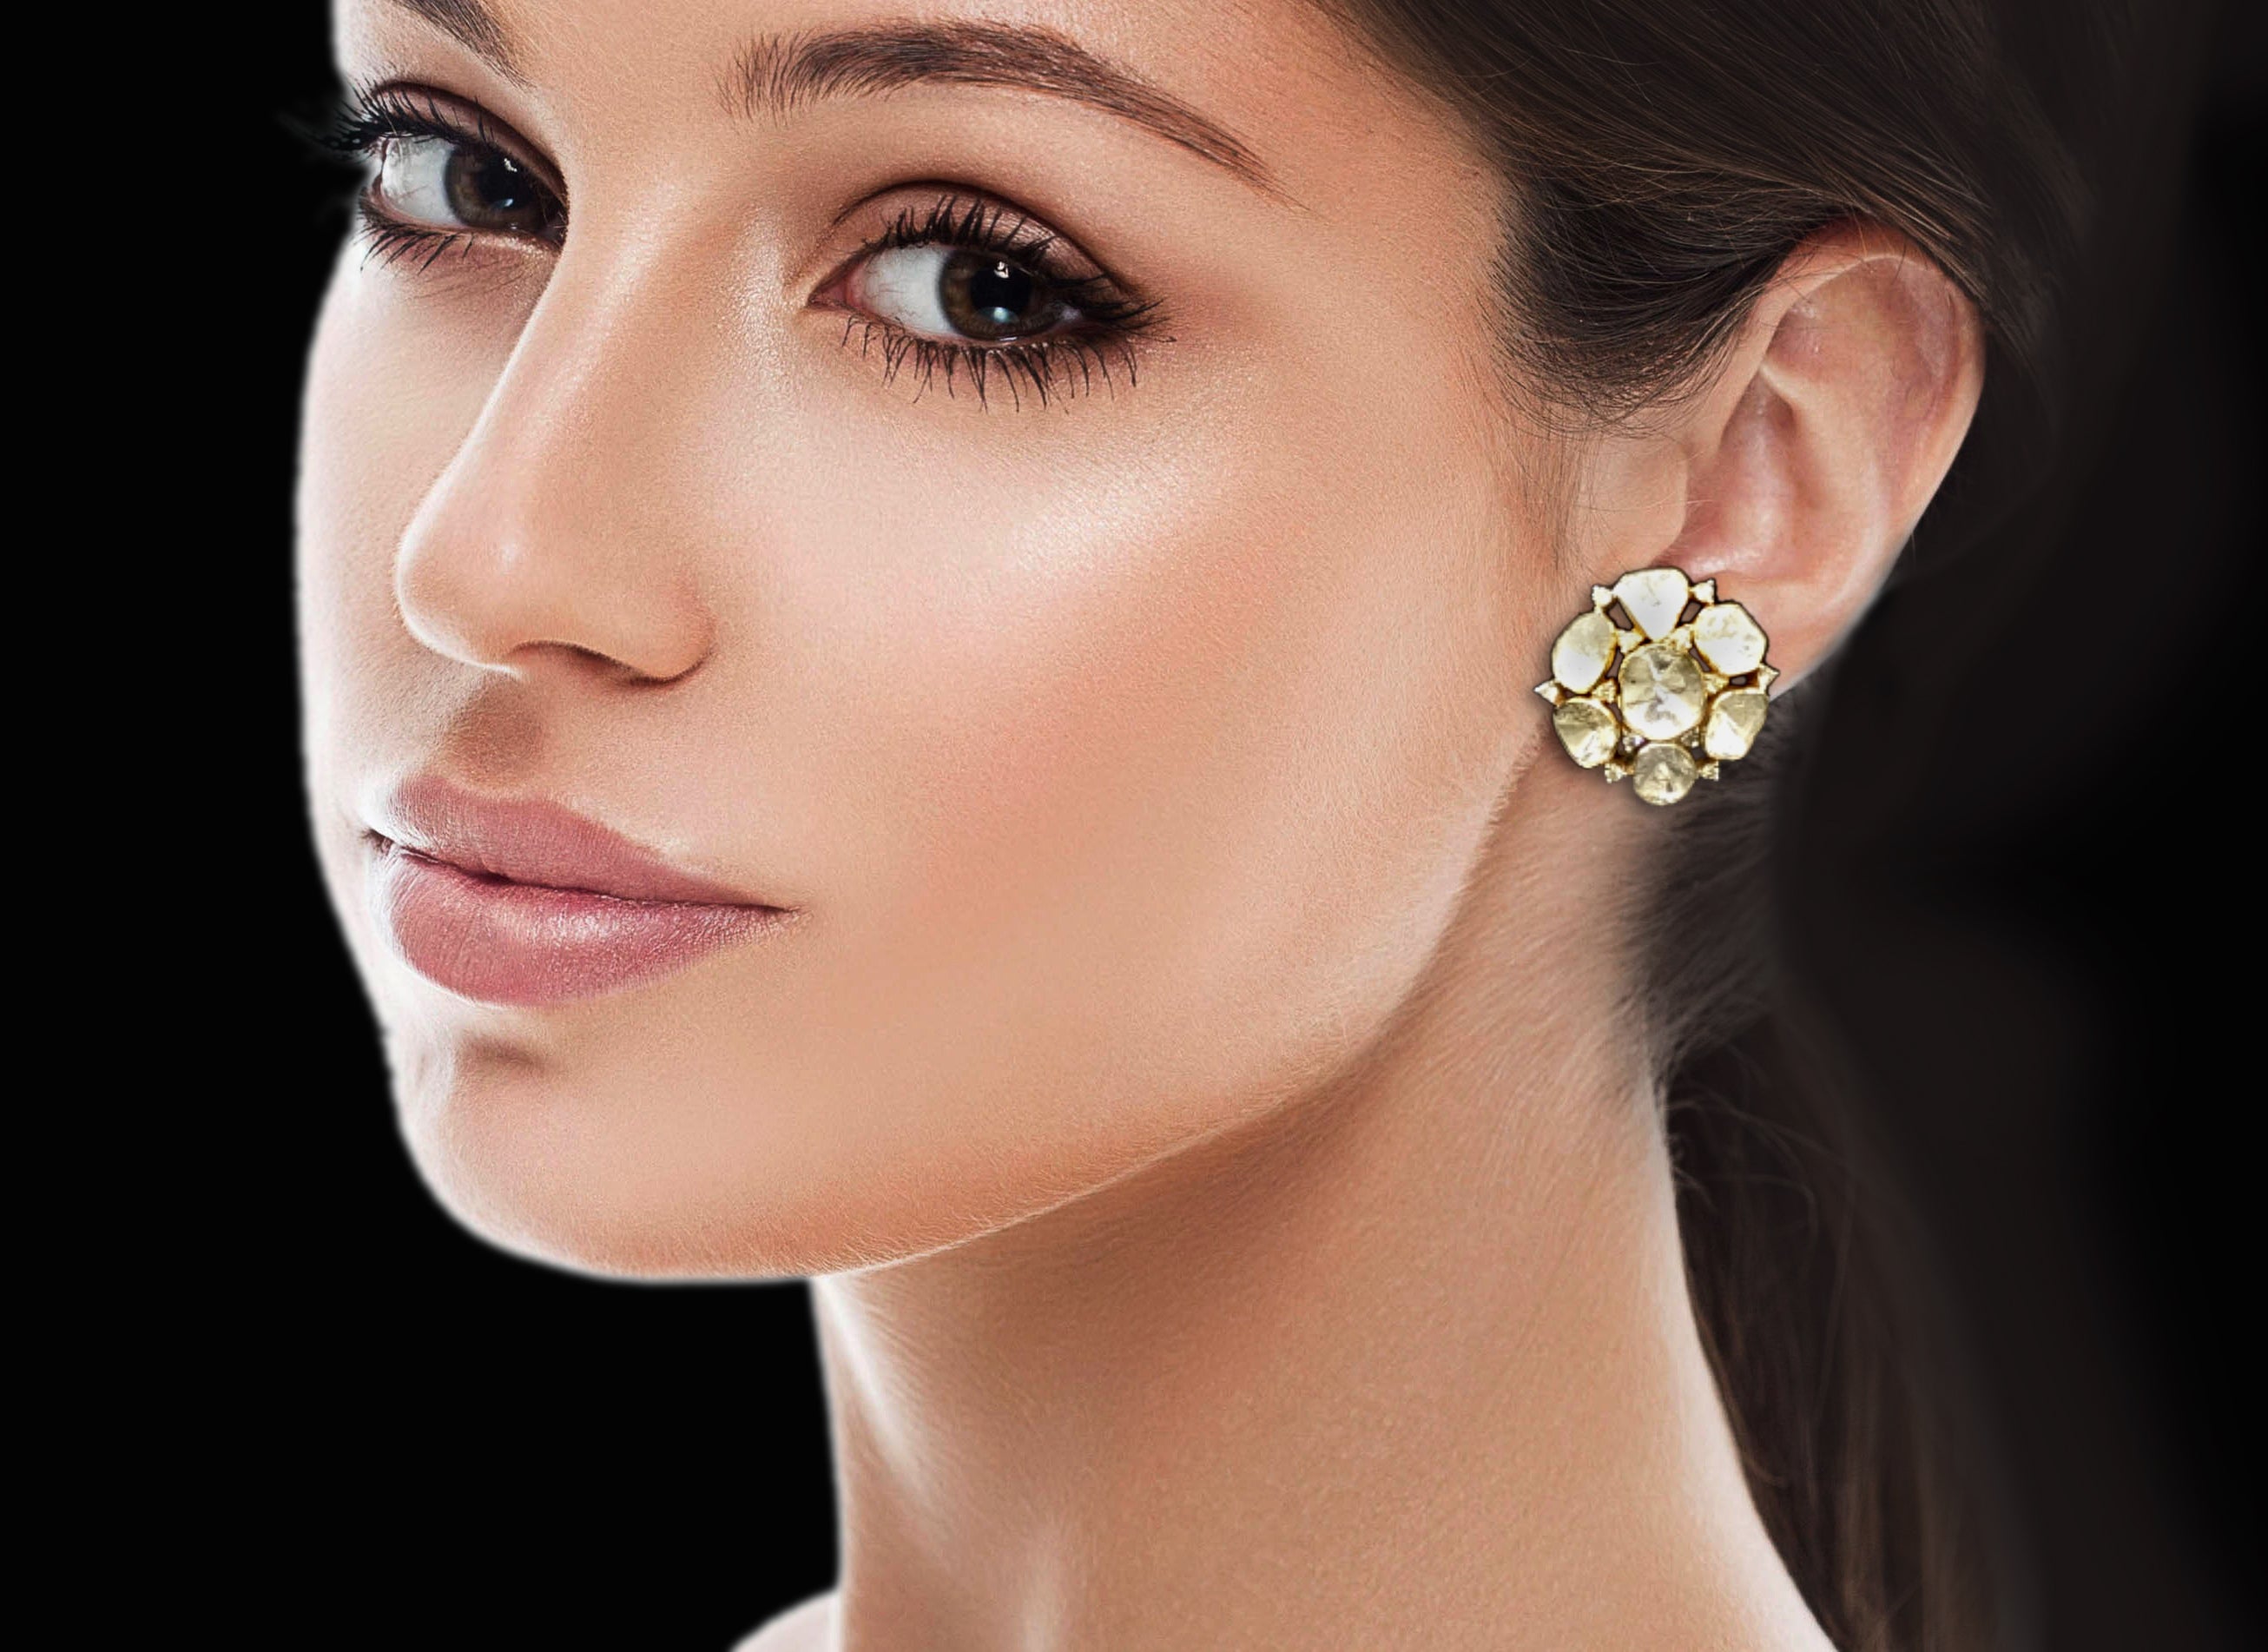 14k Gold and Diamond Polki Open Setting Tops / Studs Earring Pair with Cut Diamonds interspersed in Uncuts